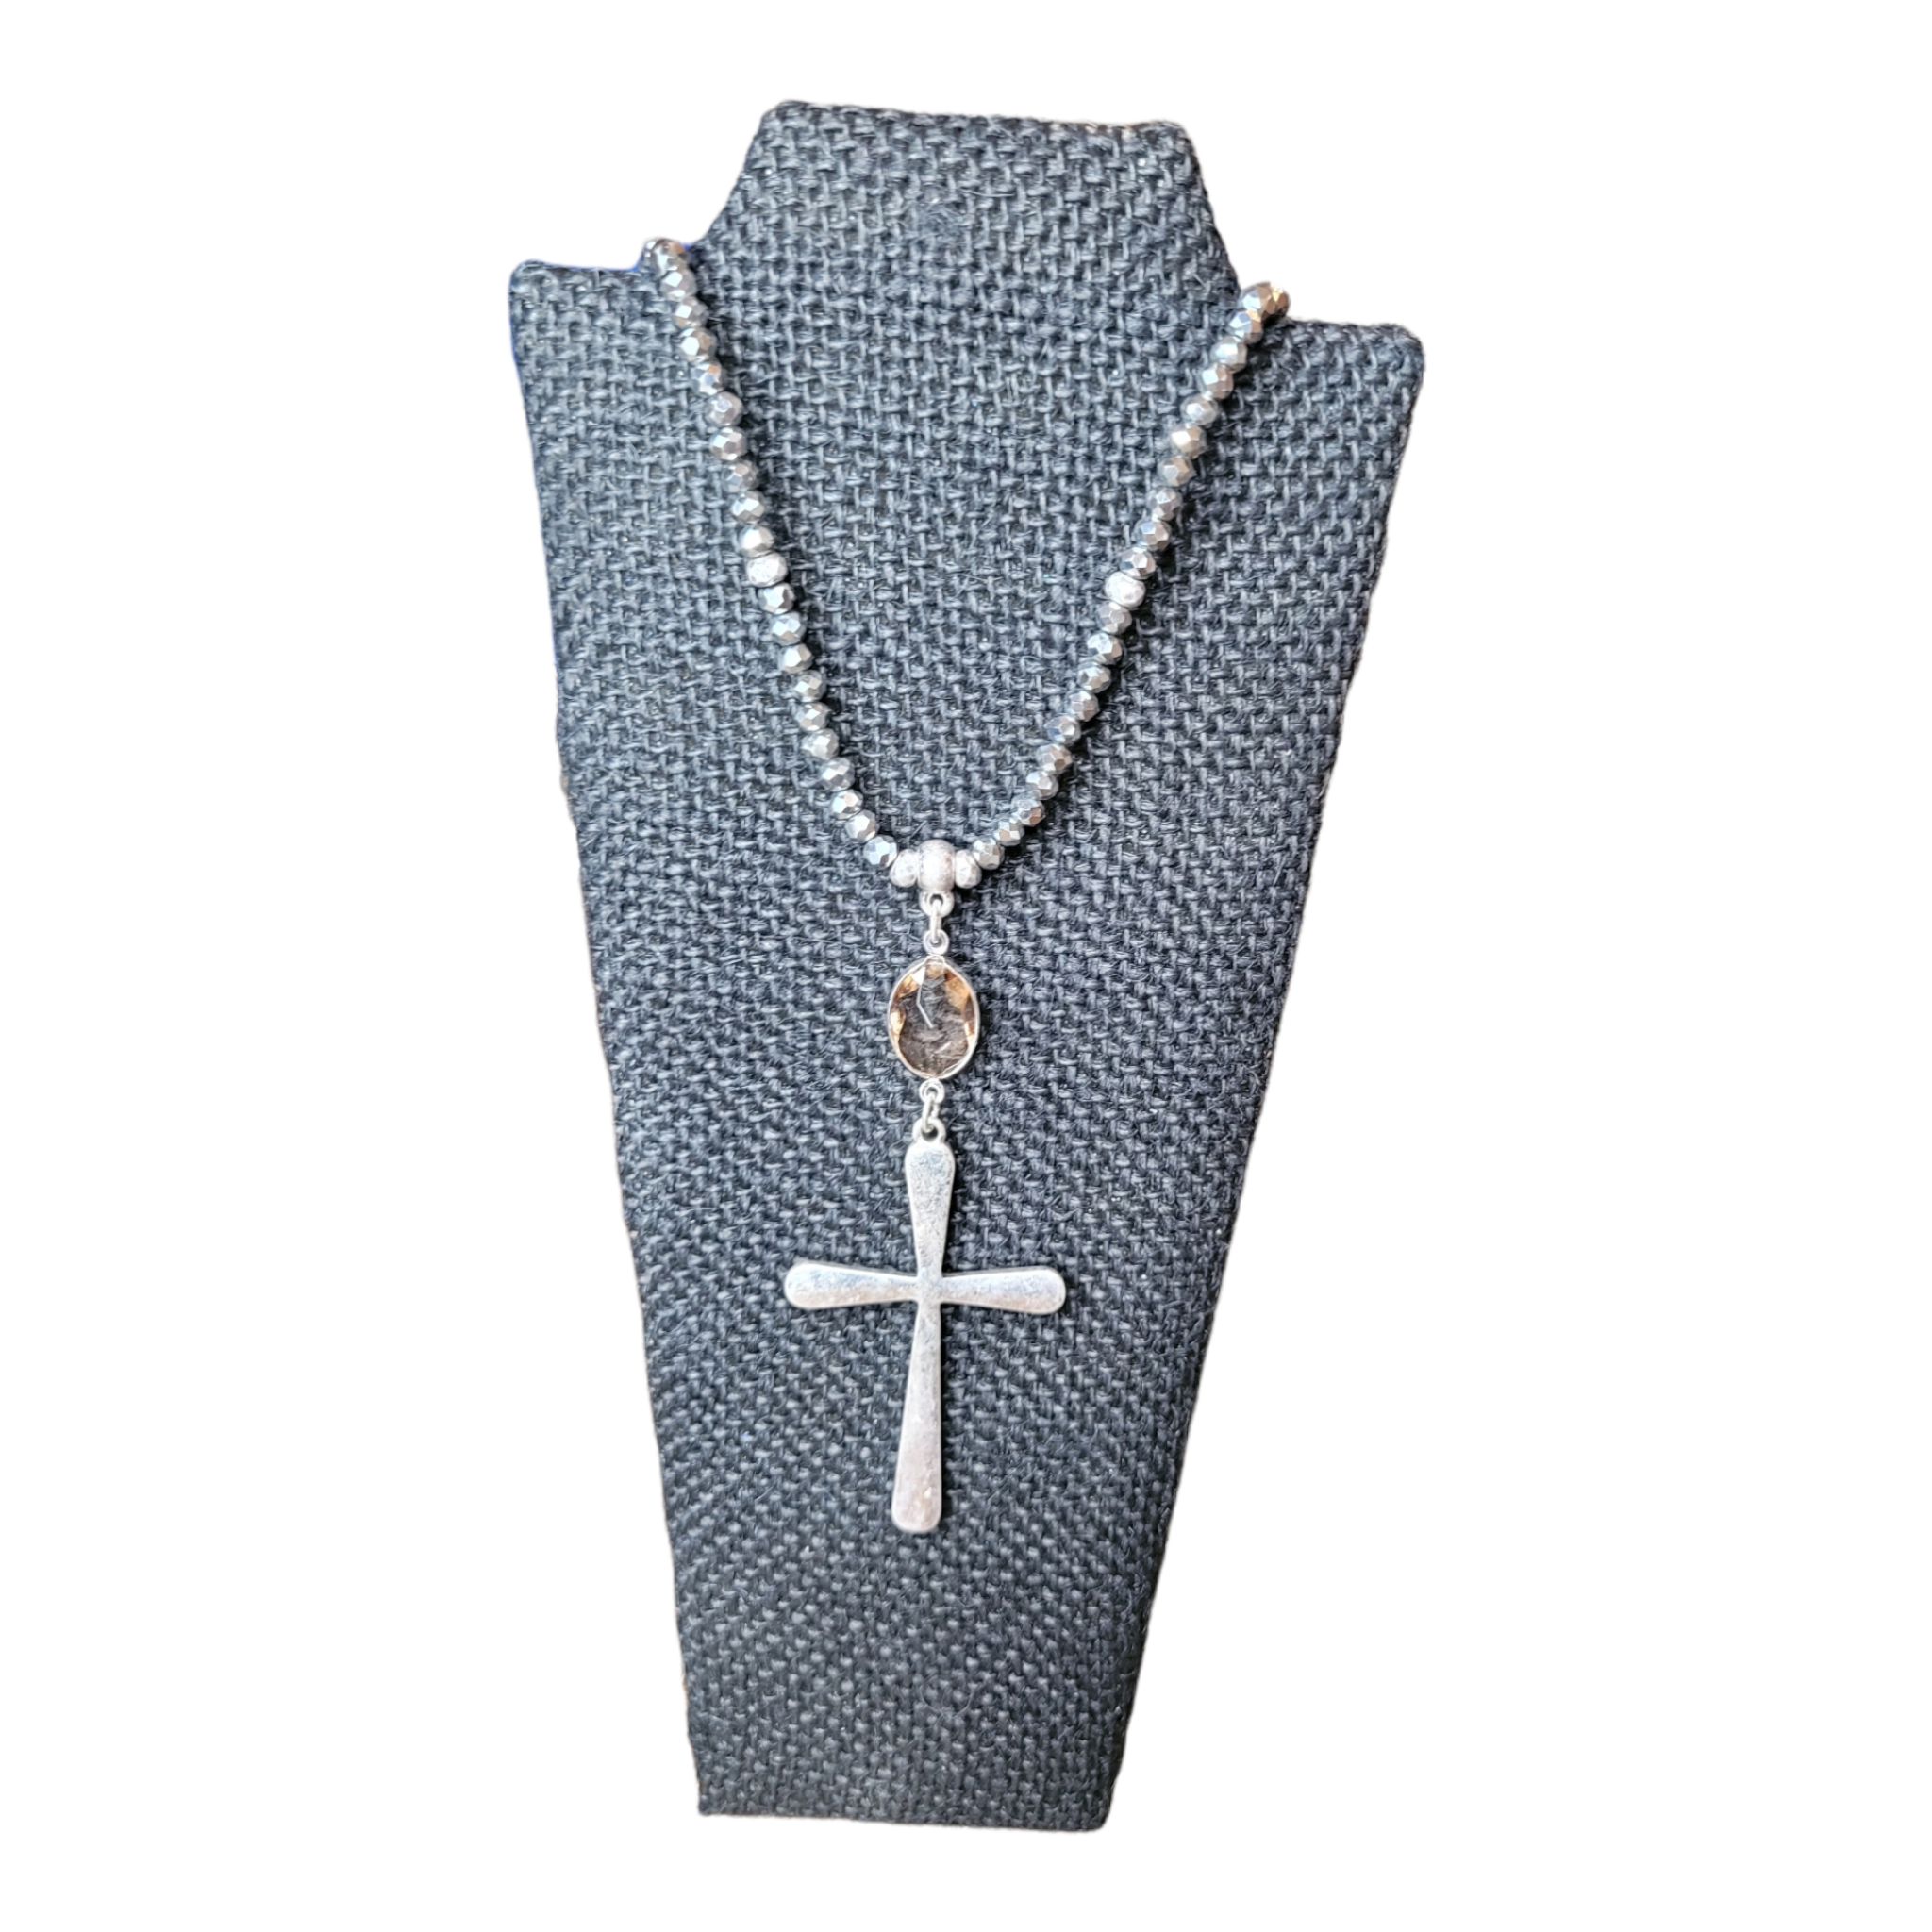 Grace Necklace - Silver-Necklaces-louisgeorgeboutique-LouisGeorge Boutique, Women’s Fashion Boutique Located in Trussville, Alabama